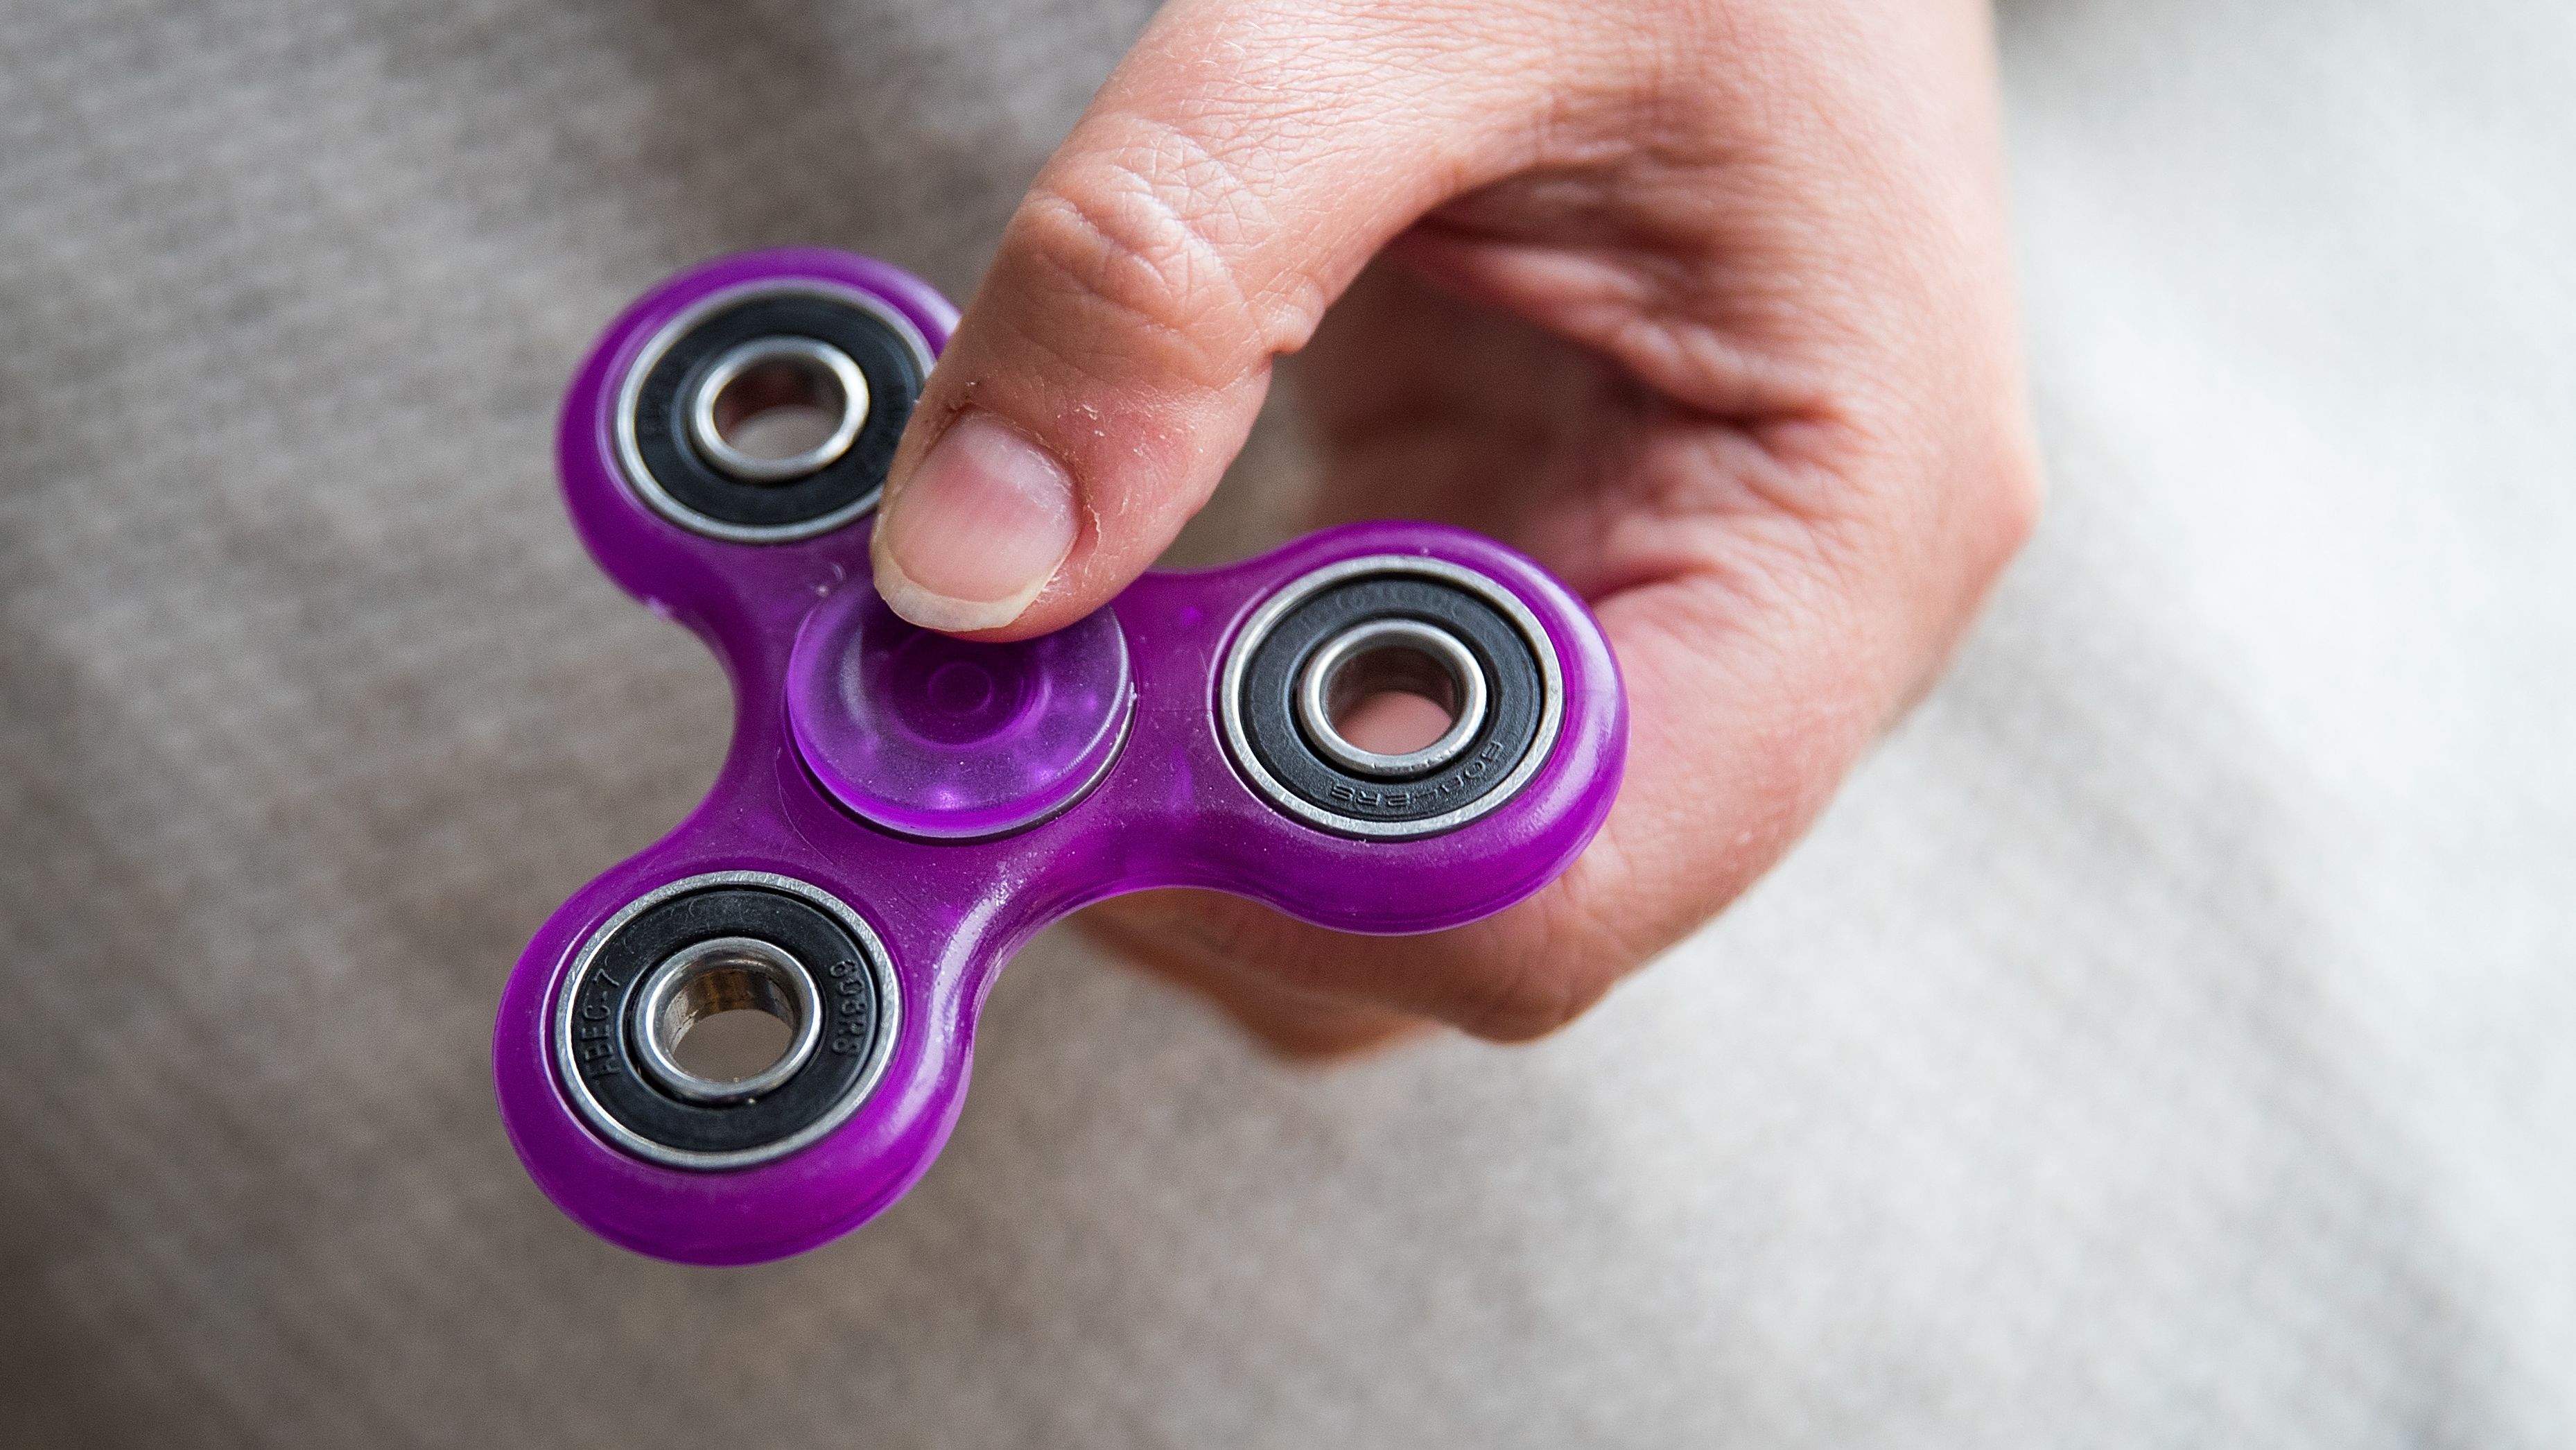 Your kids like fidget toys? Here's why